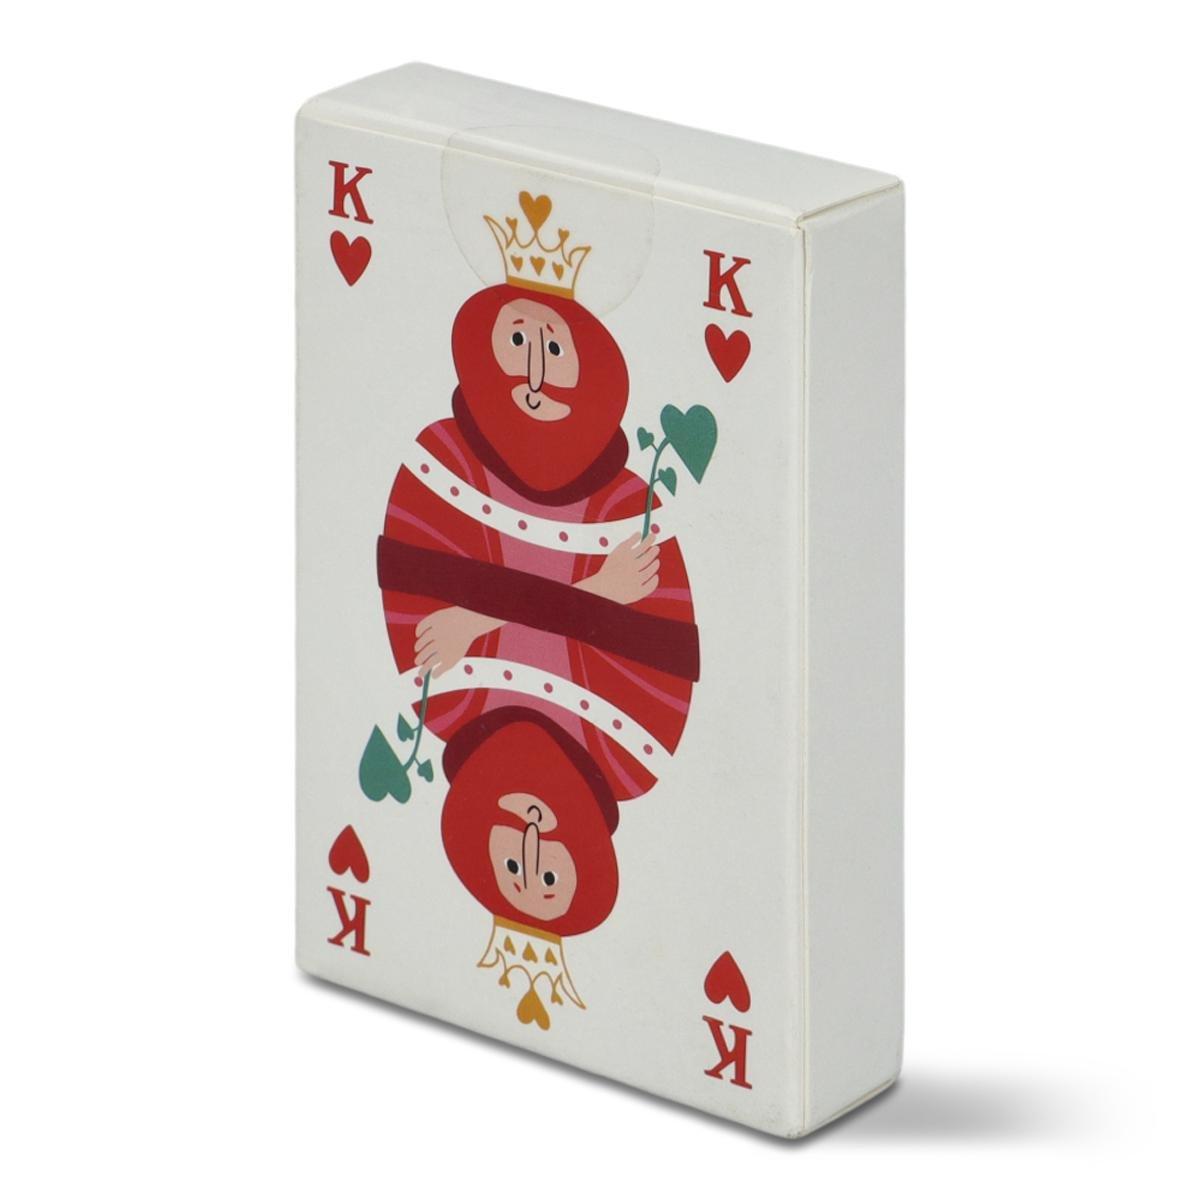 White classic playing cards